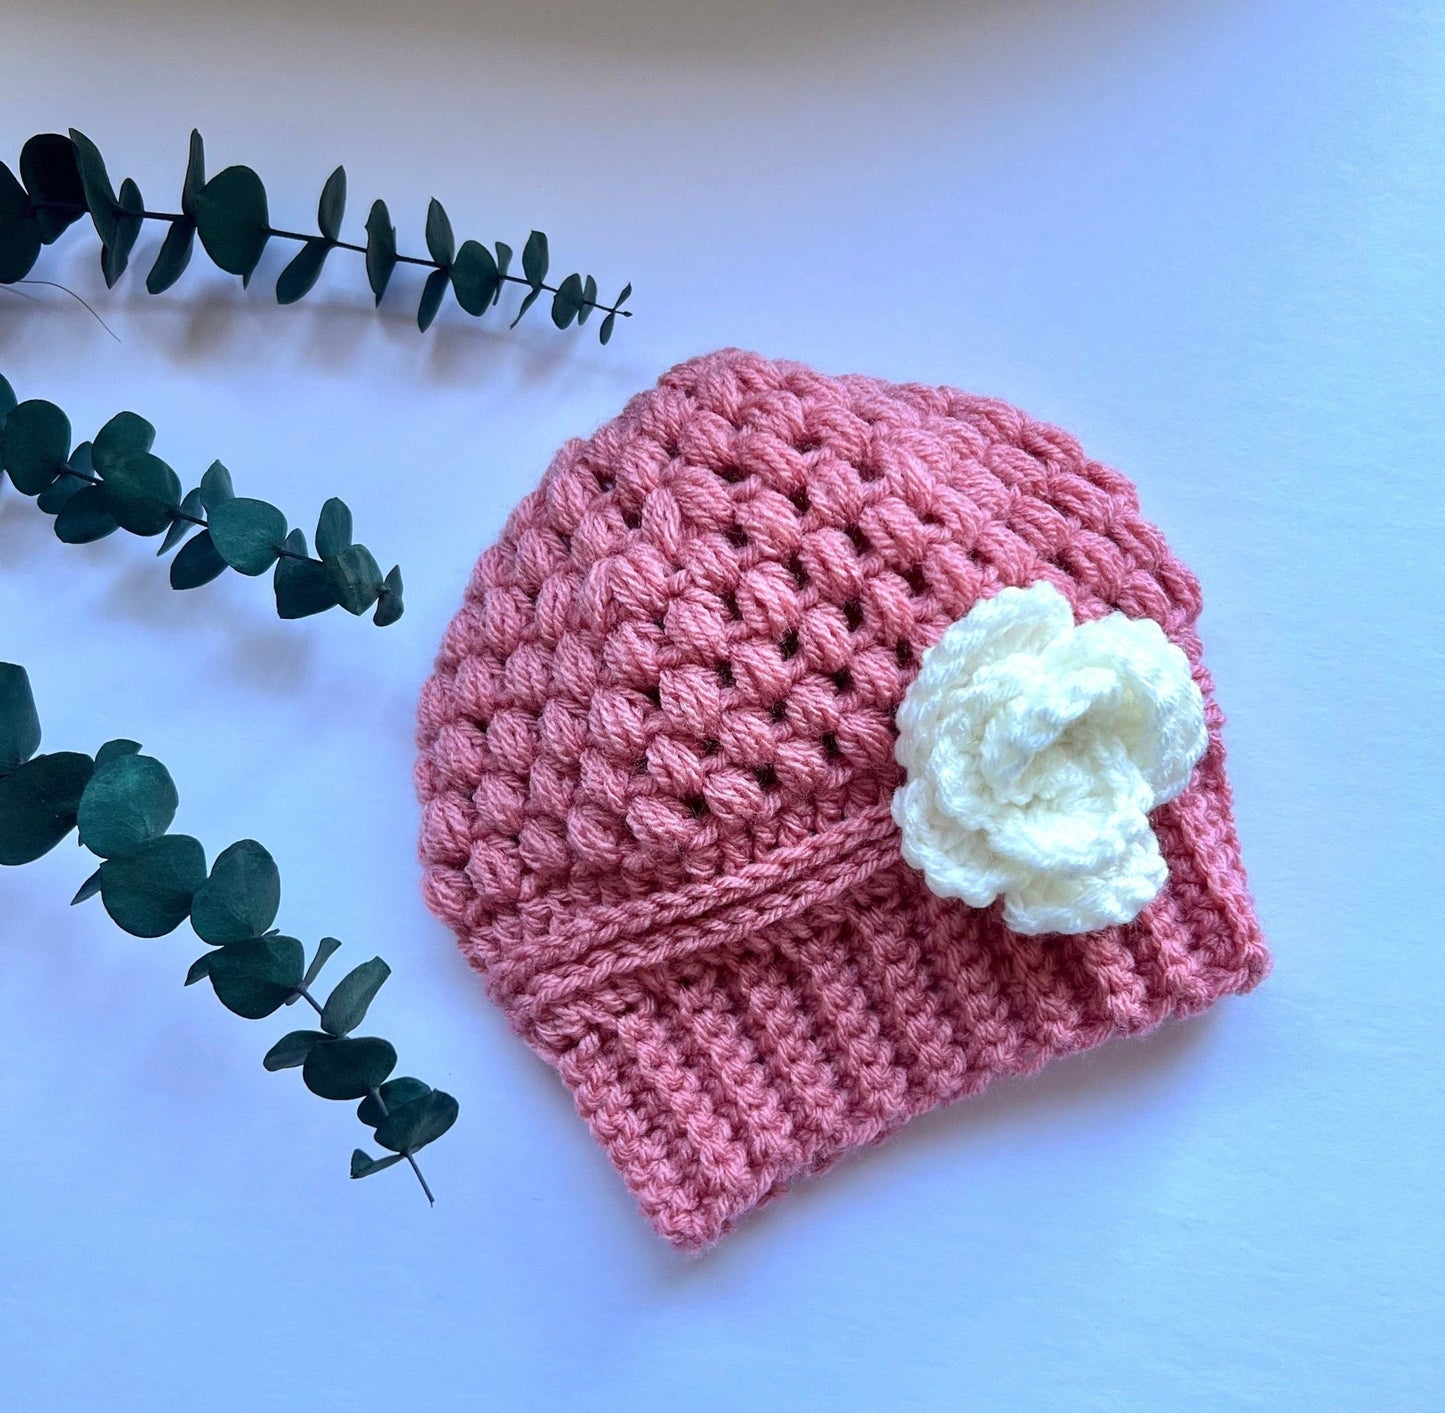 Stylish trendy crochet hat for girl dusty rose pink with white crochet flower, fall or winter weather crochet hat , “mom and me” hat set, - Lilly Grace Sparkle Boutique